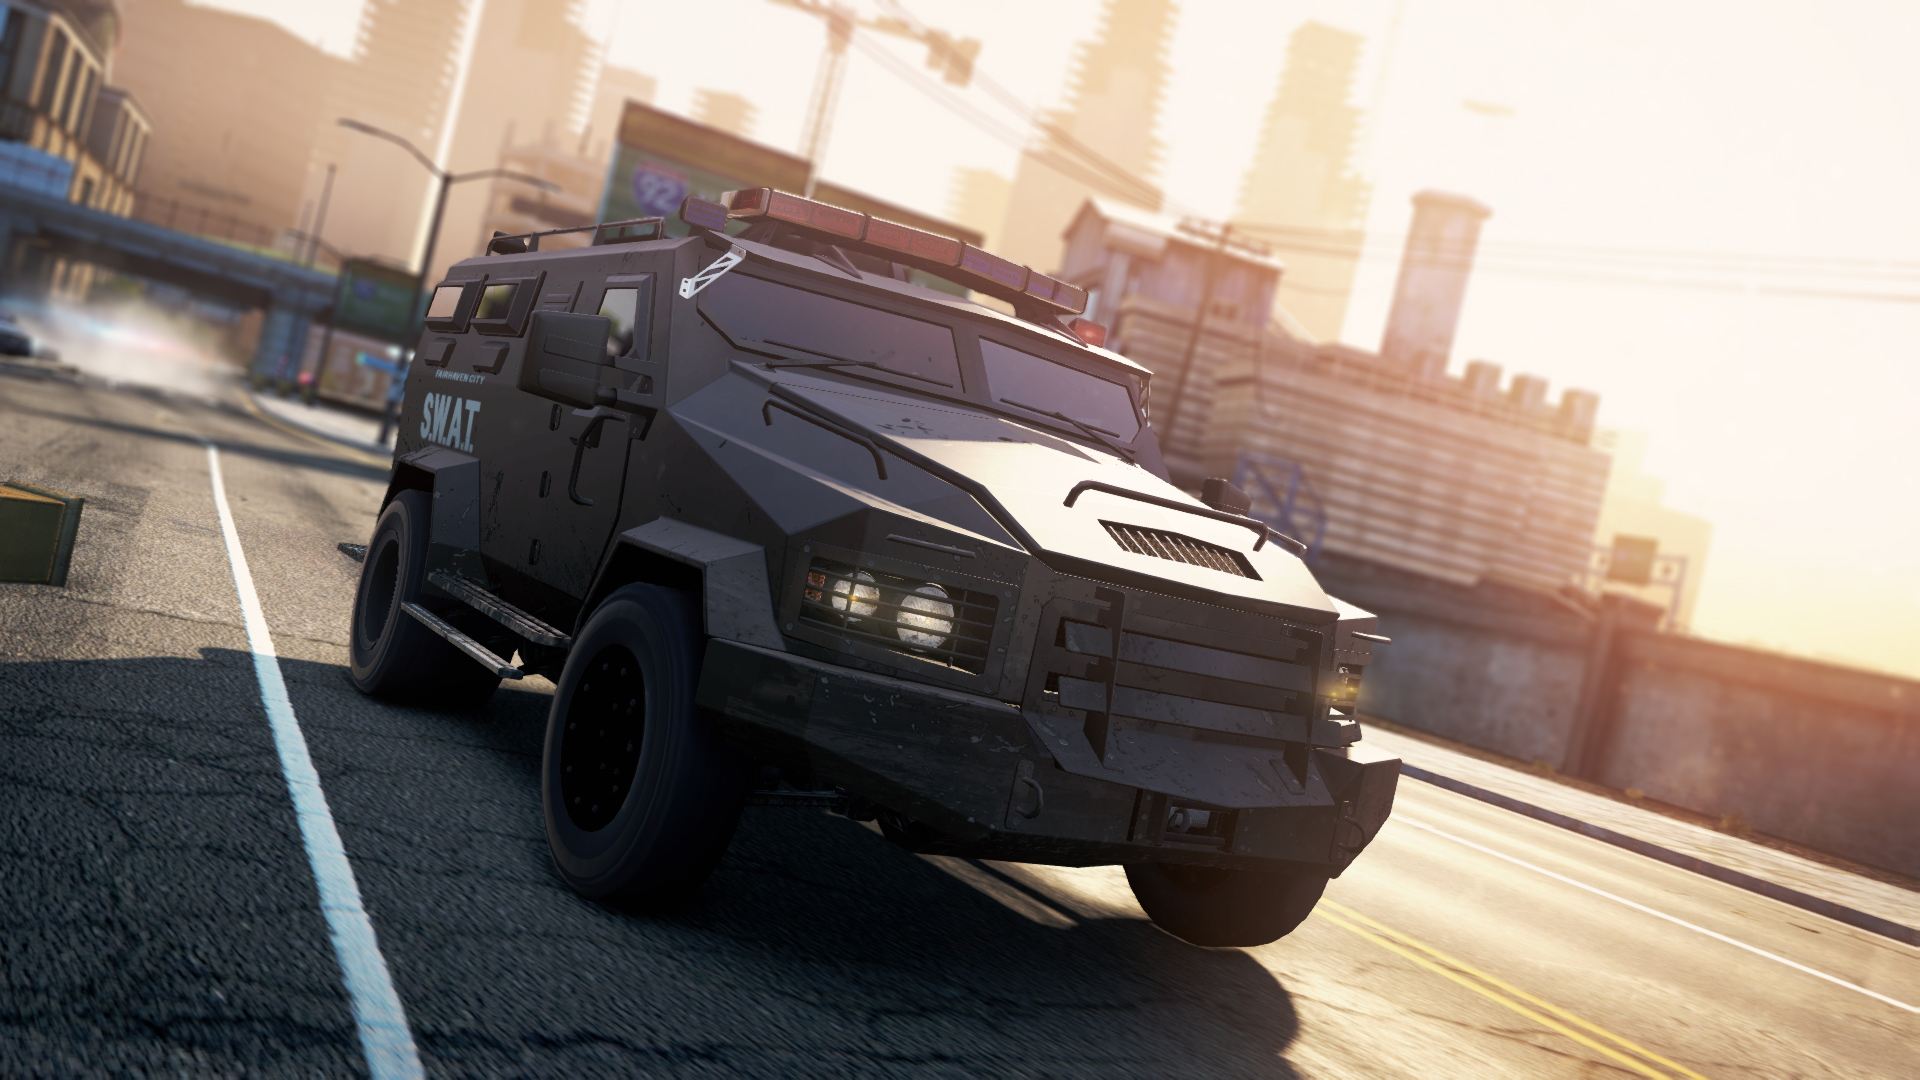 Swat Truck Need For Speed